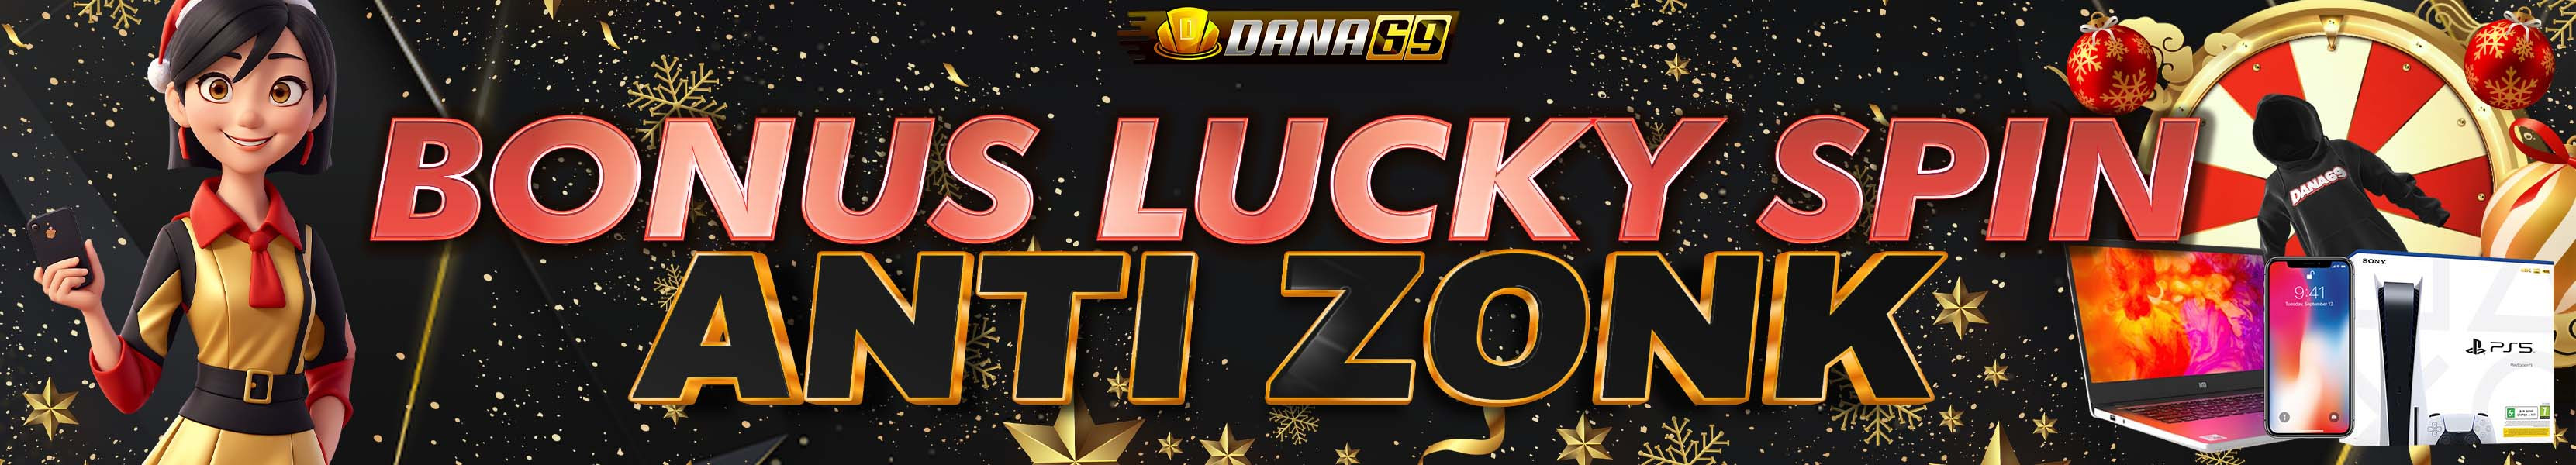 EVENT LUCKY SPIN ANTI ZONK